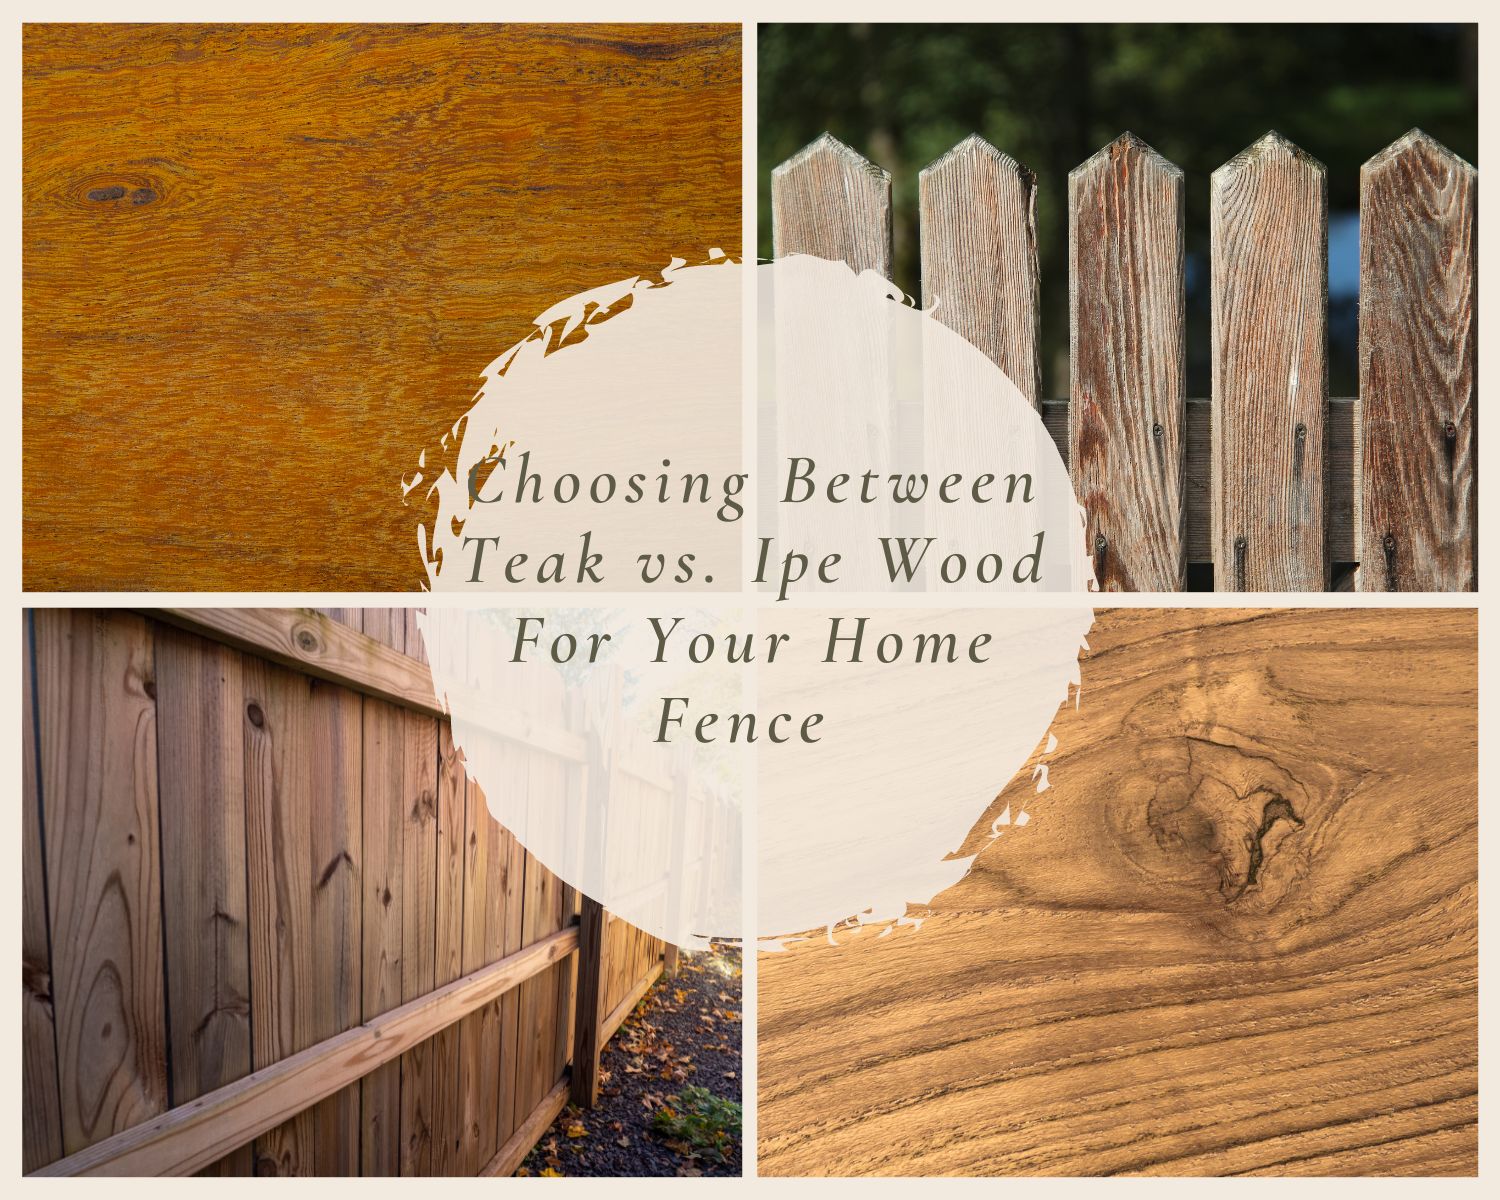 Can You Stain Teak Wood Fences and Furniture? - Teak & Deck